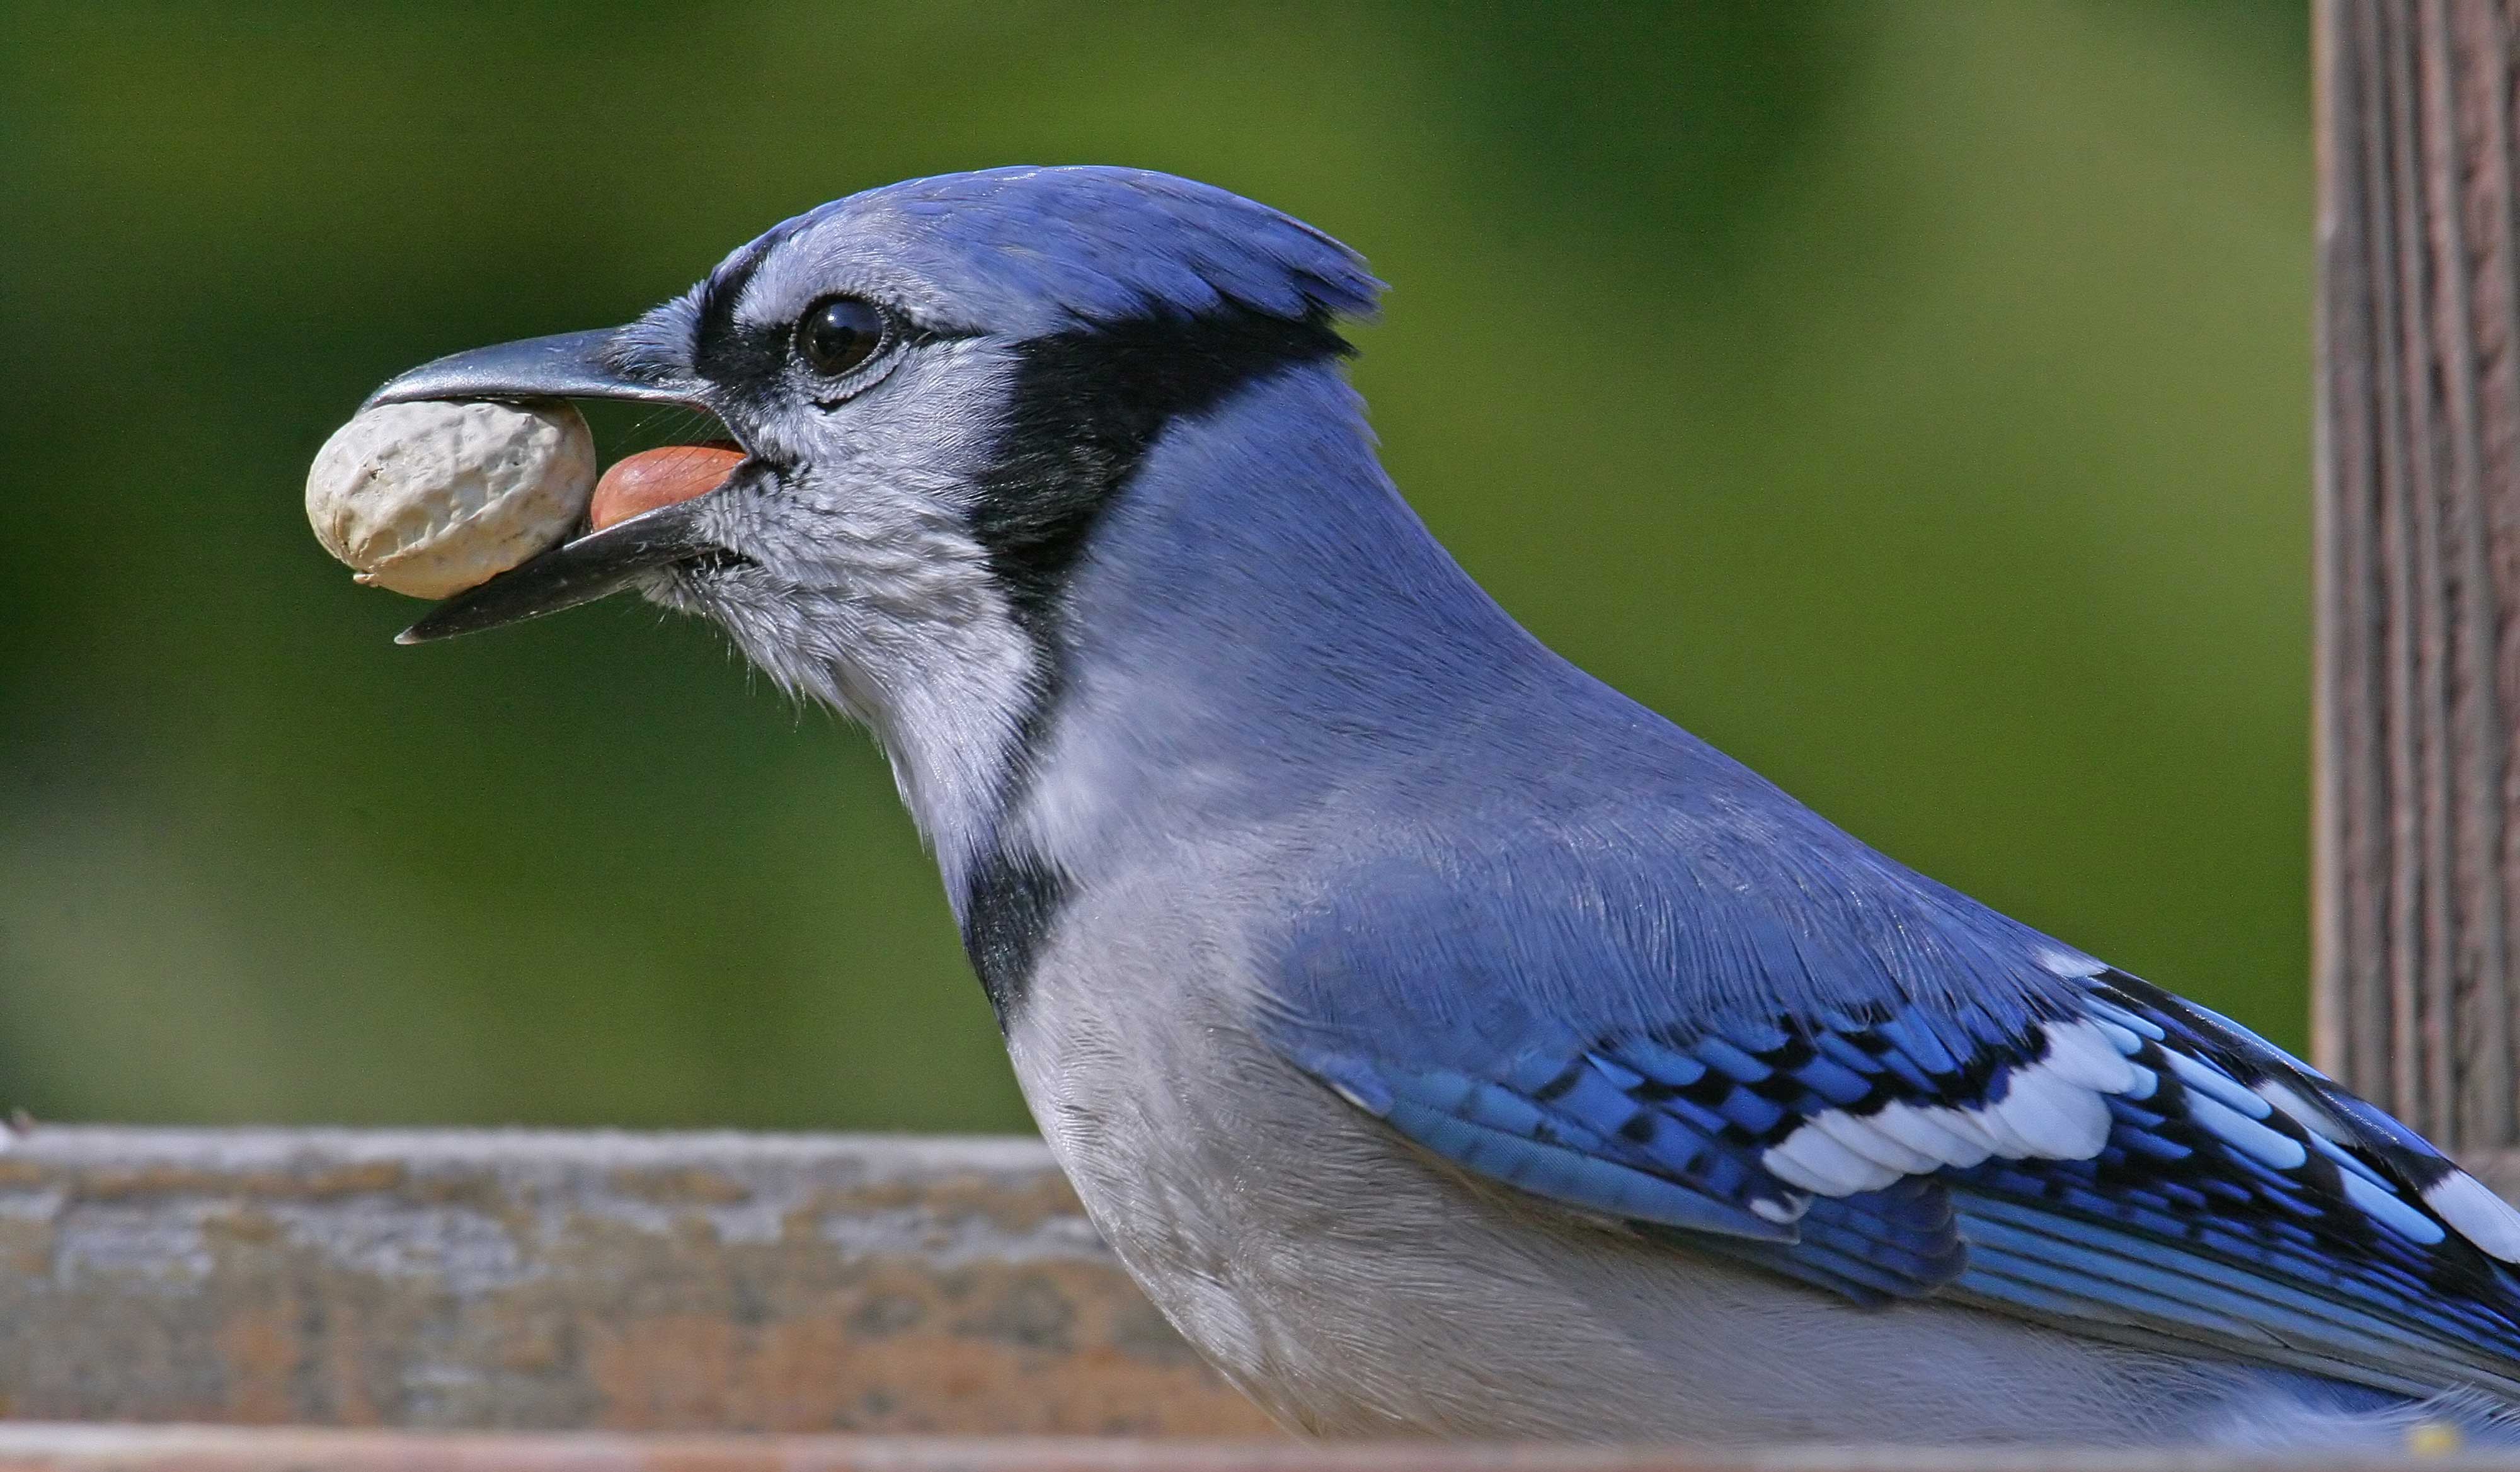 A blue jay with a nut in its mouth.